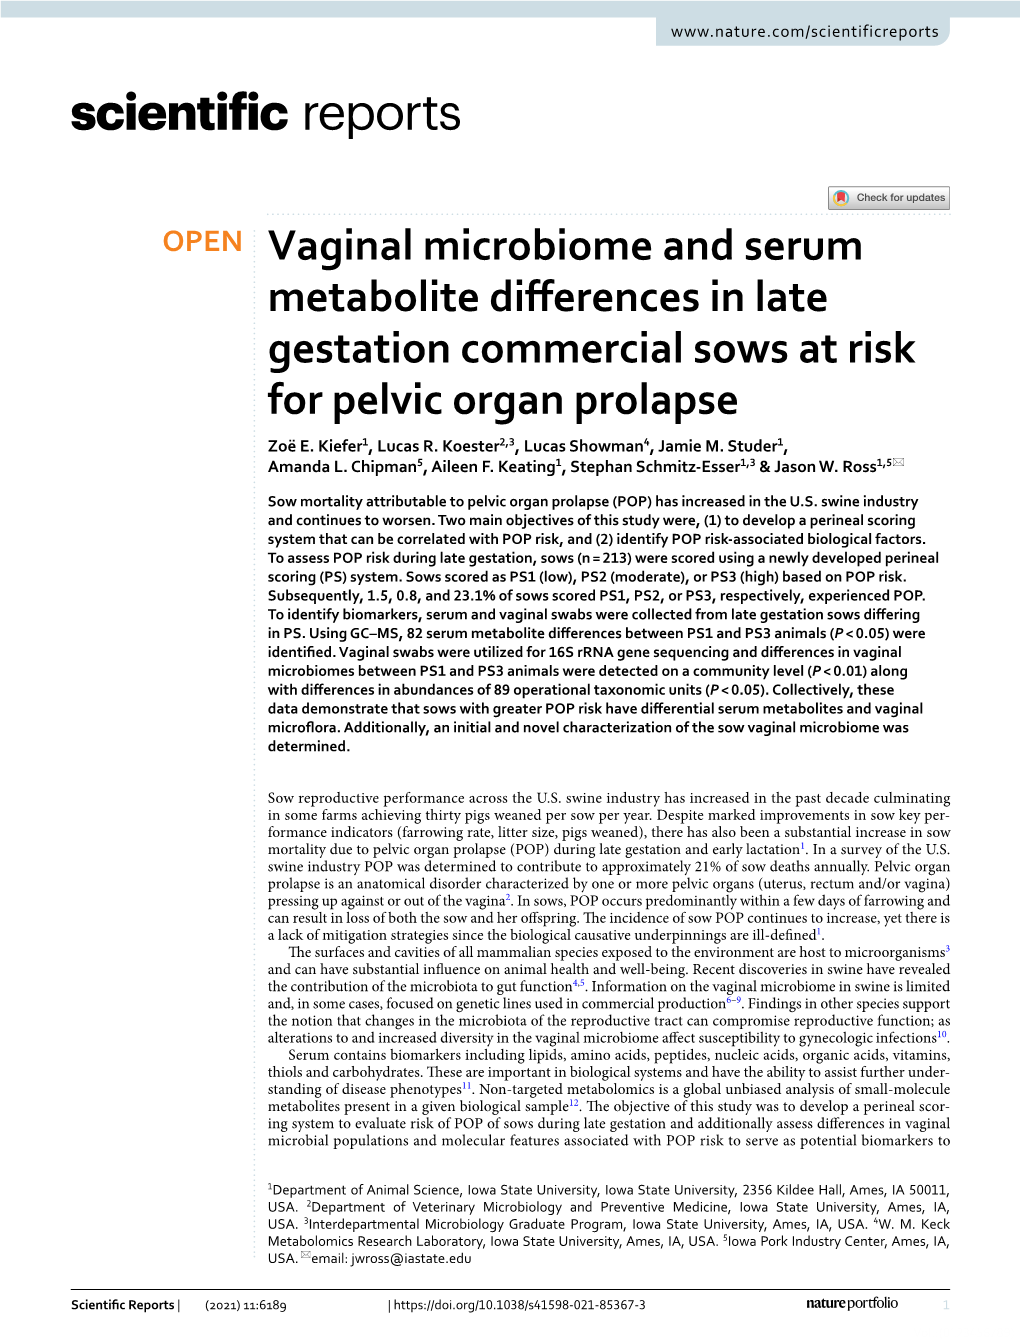 Vaginal Microbiome and Serum Metabolite Differences in Late